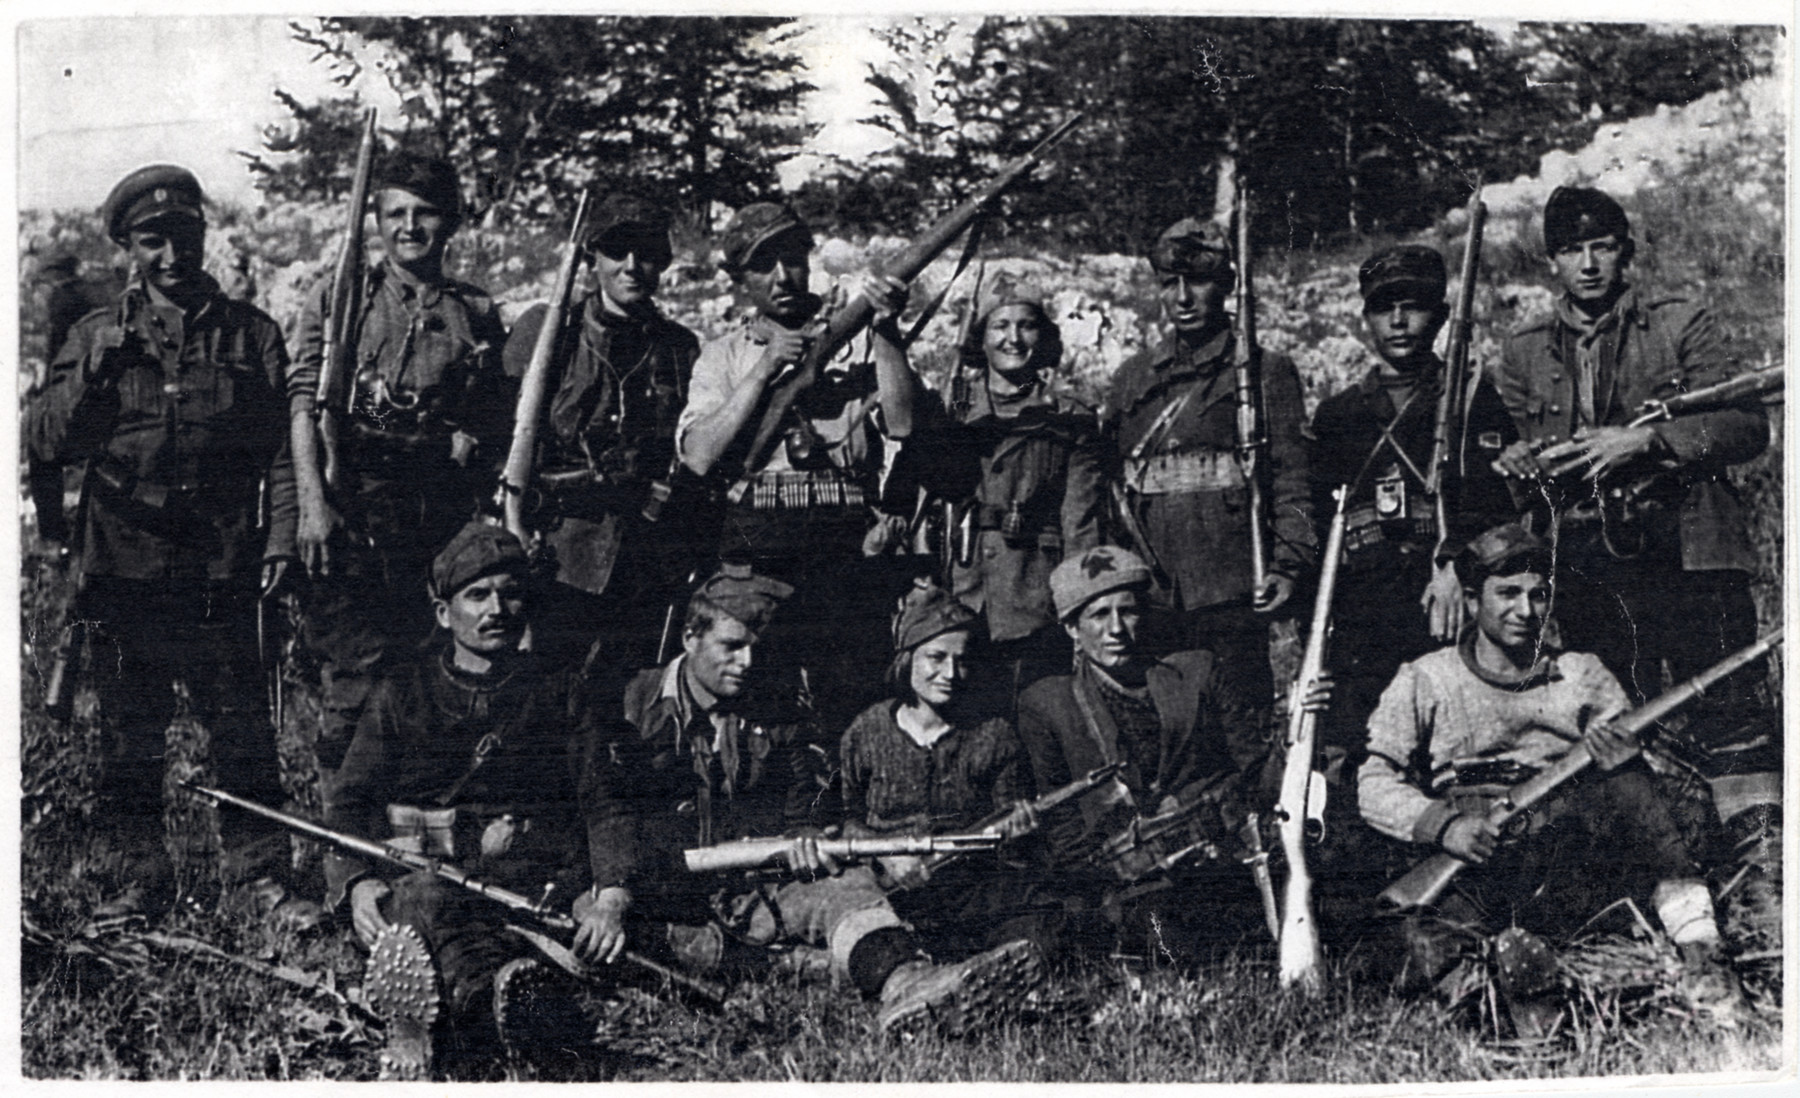 Macedonian partisans of the detachment "Damyan Gruev."  

Among those pictured are Jamila Kolonomos (back row, fourth from the left) and Adela Faradji (seated front row, center).